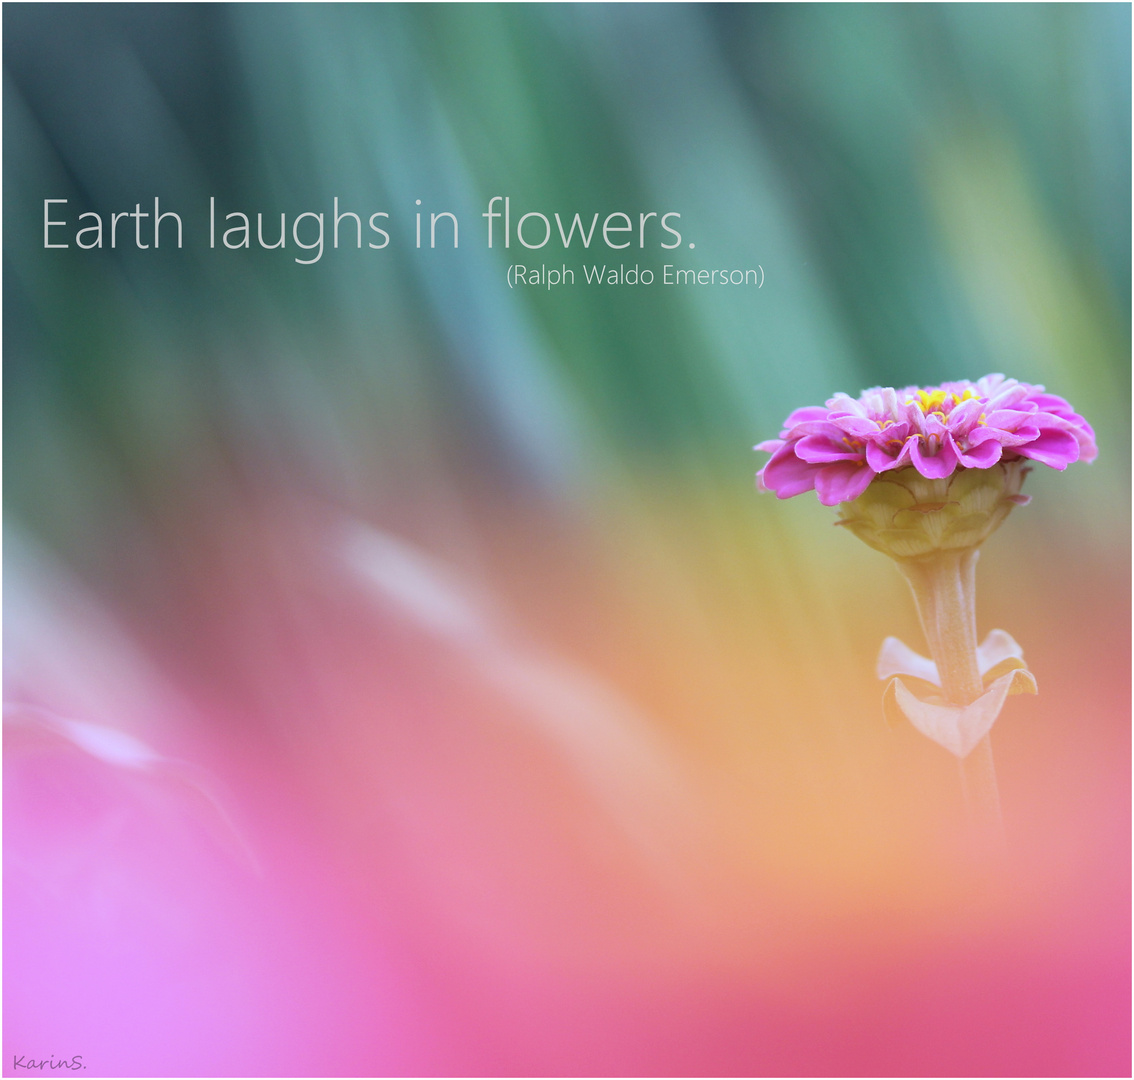 Earth laughs in flowers